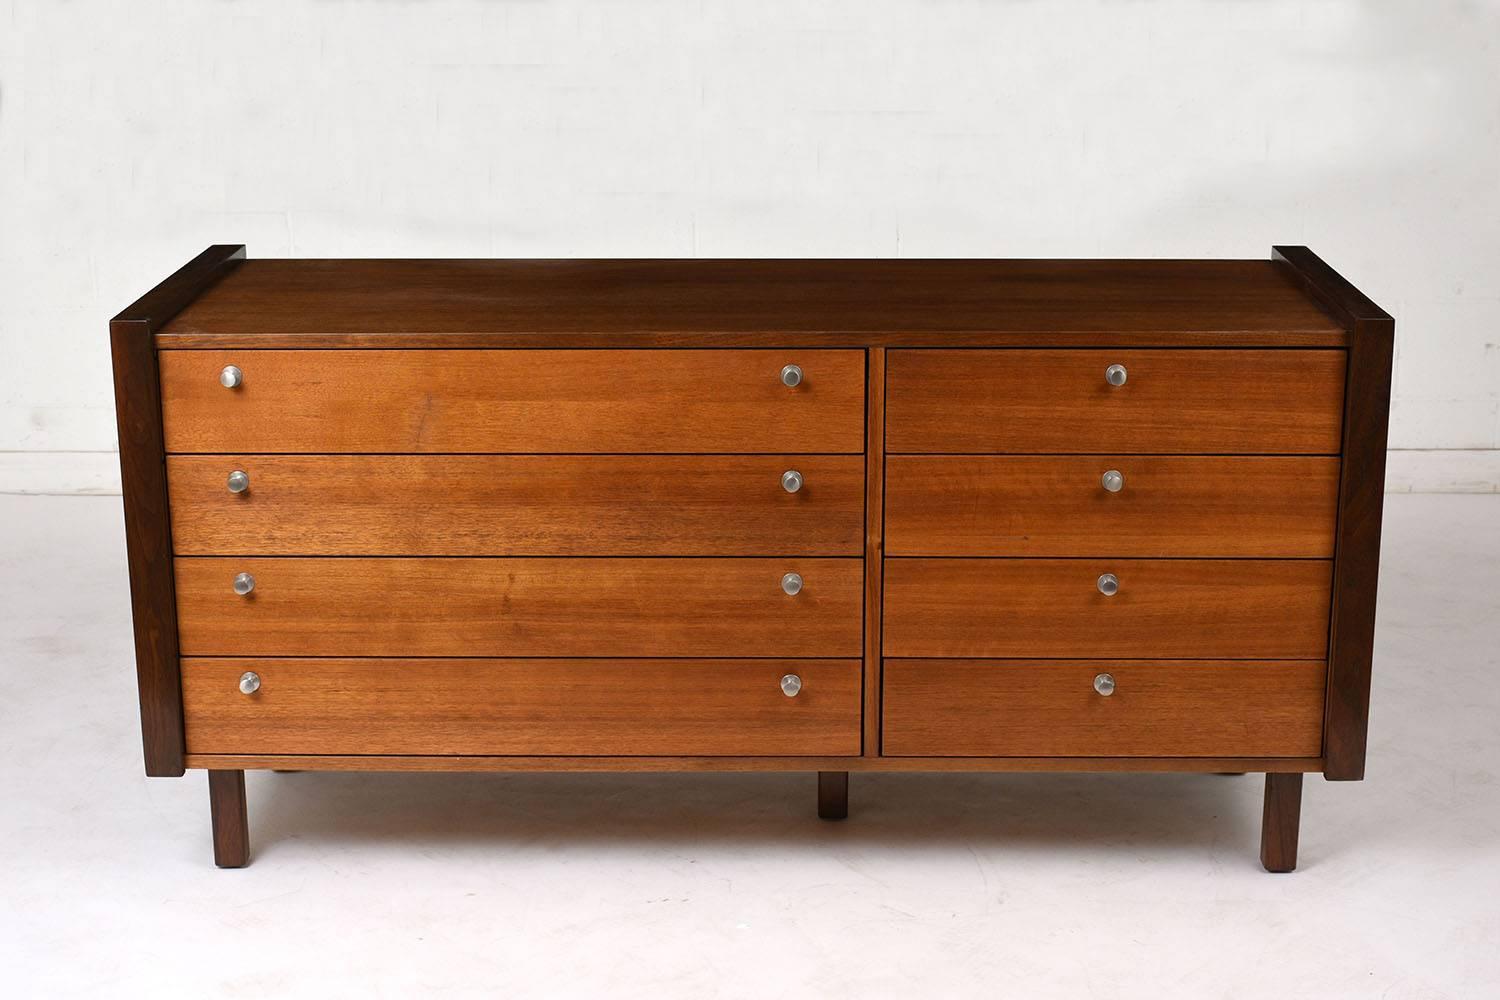 This 1970's Mid-Century Modern-style chest of drawers is made from walnut wood stained in a mid tone walnut color with a polished finish. The chest has eight drawers, four larger drawers on the left and four smaller drawers on the right. The drawers